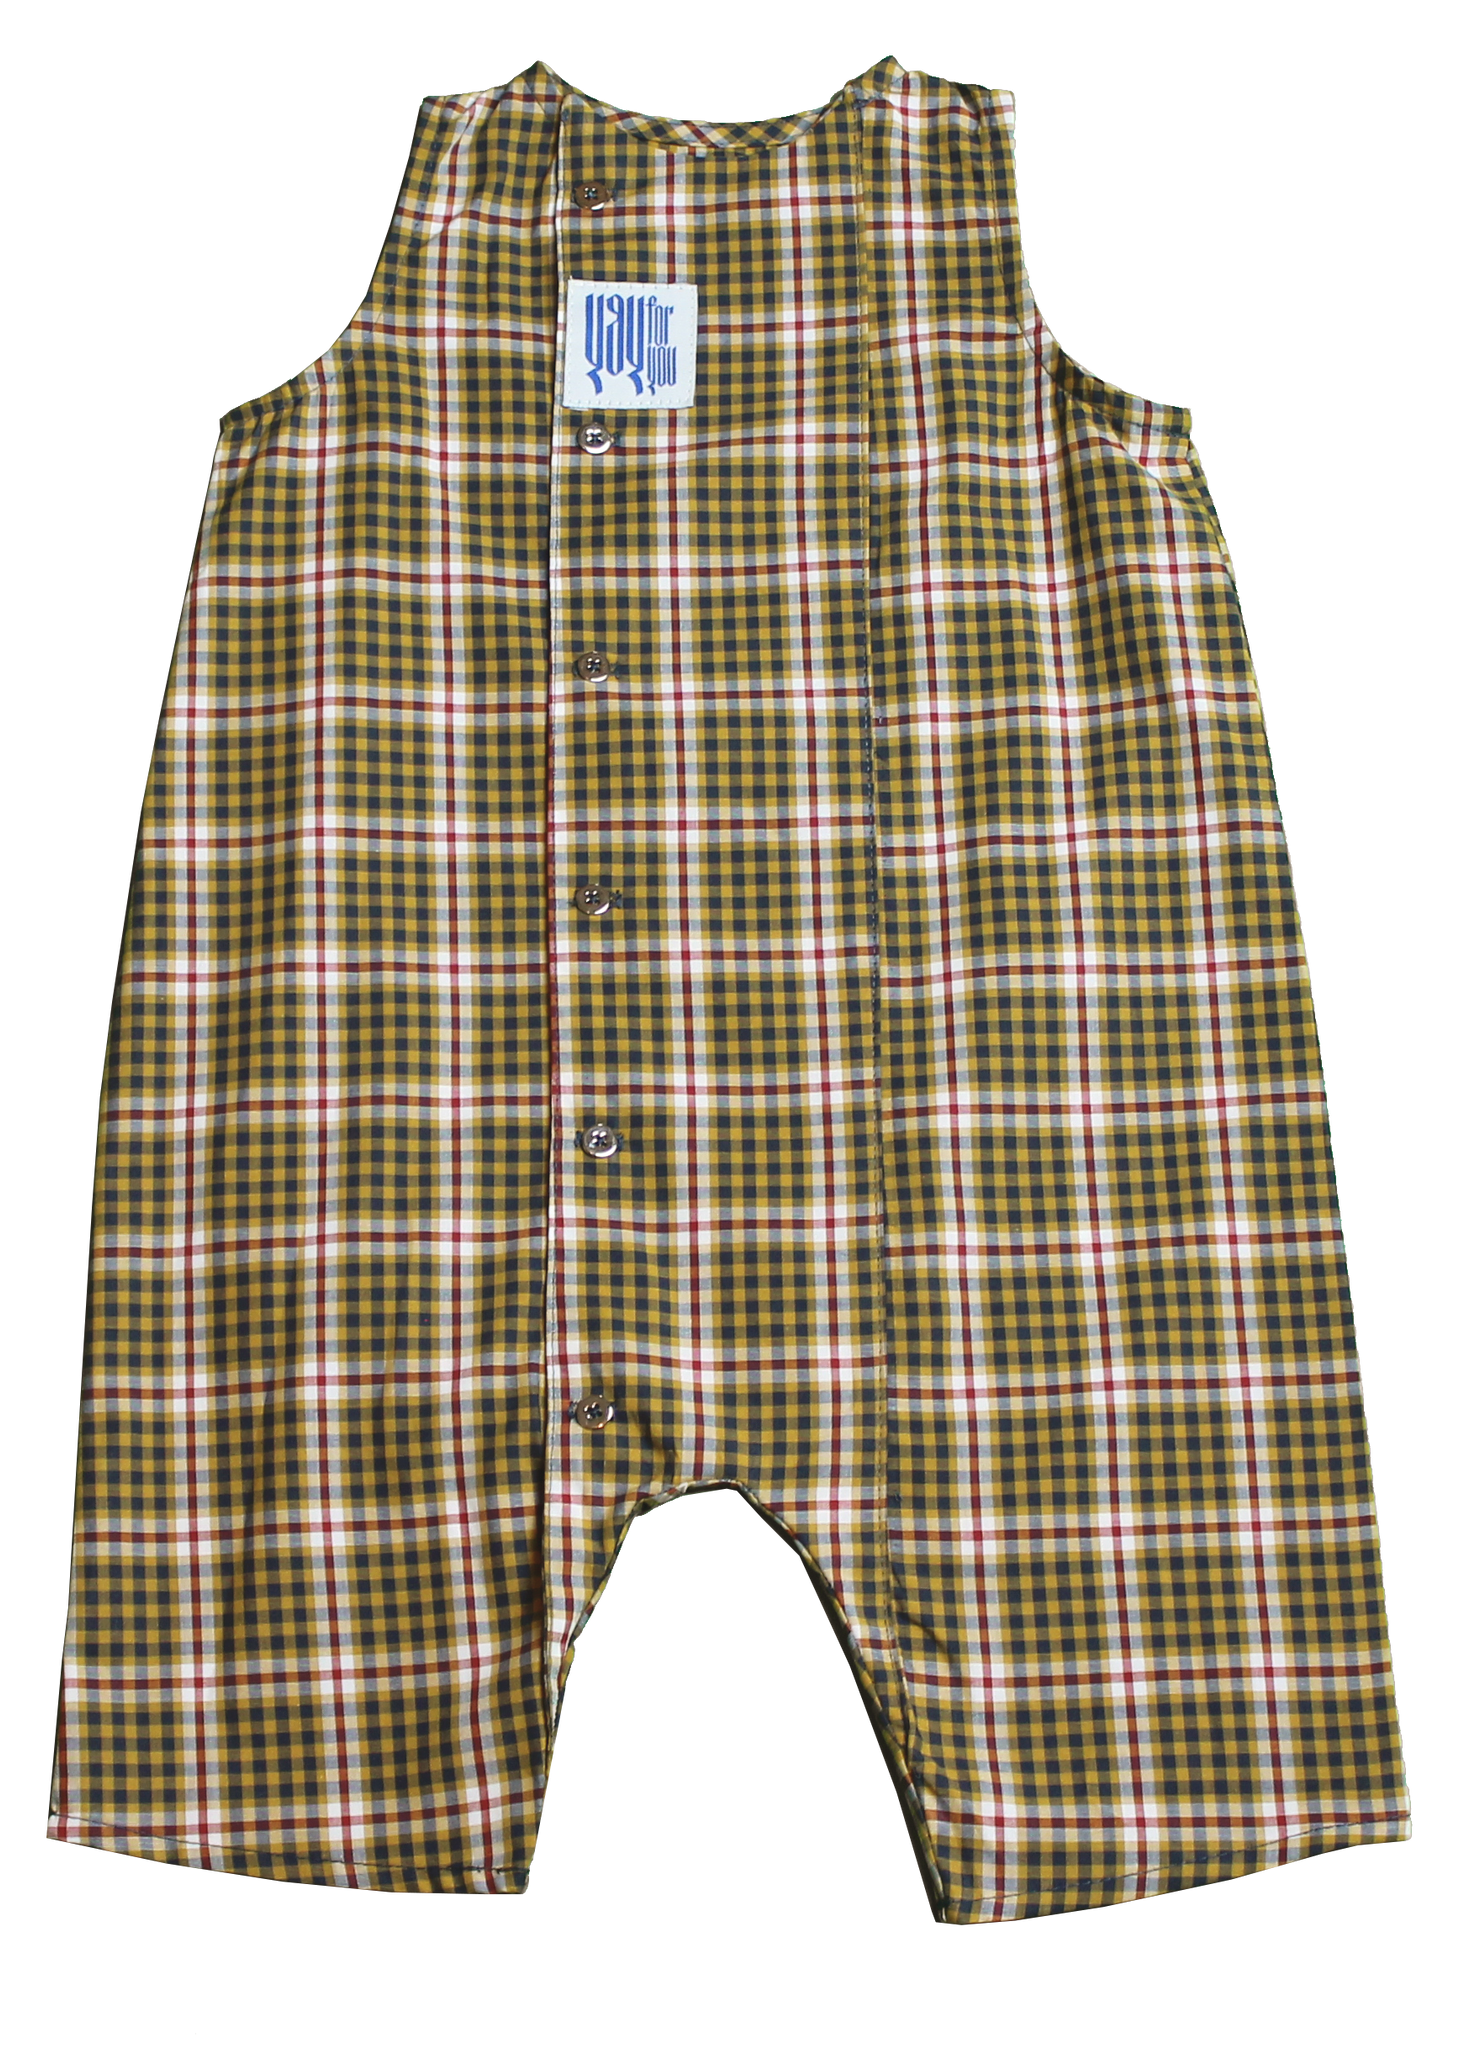 THE ANDY - MUTLI GINGHAM